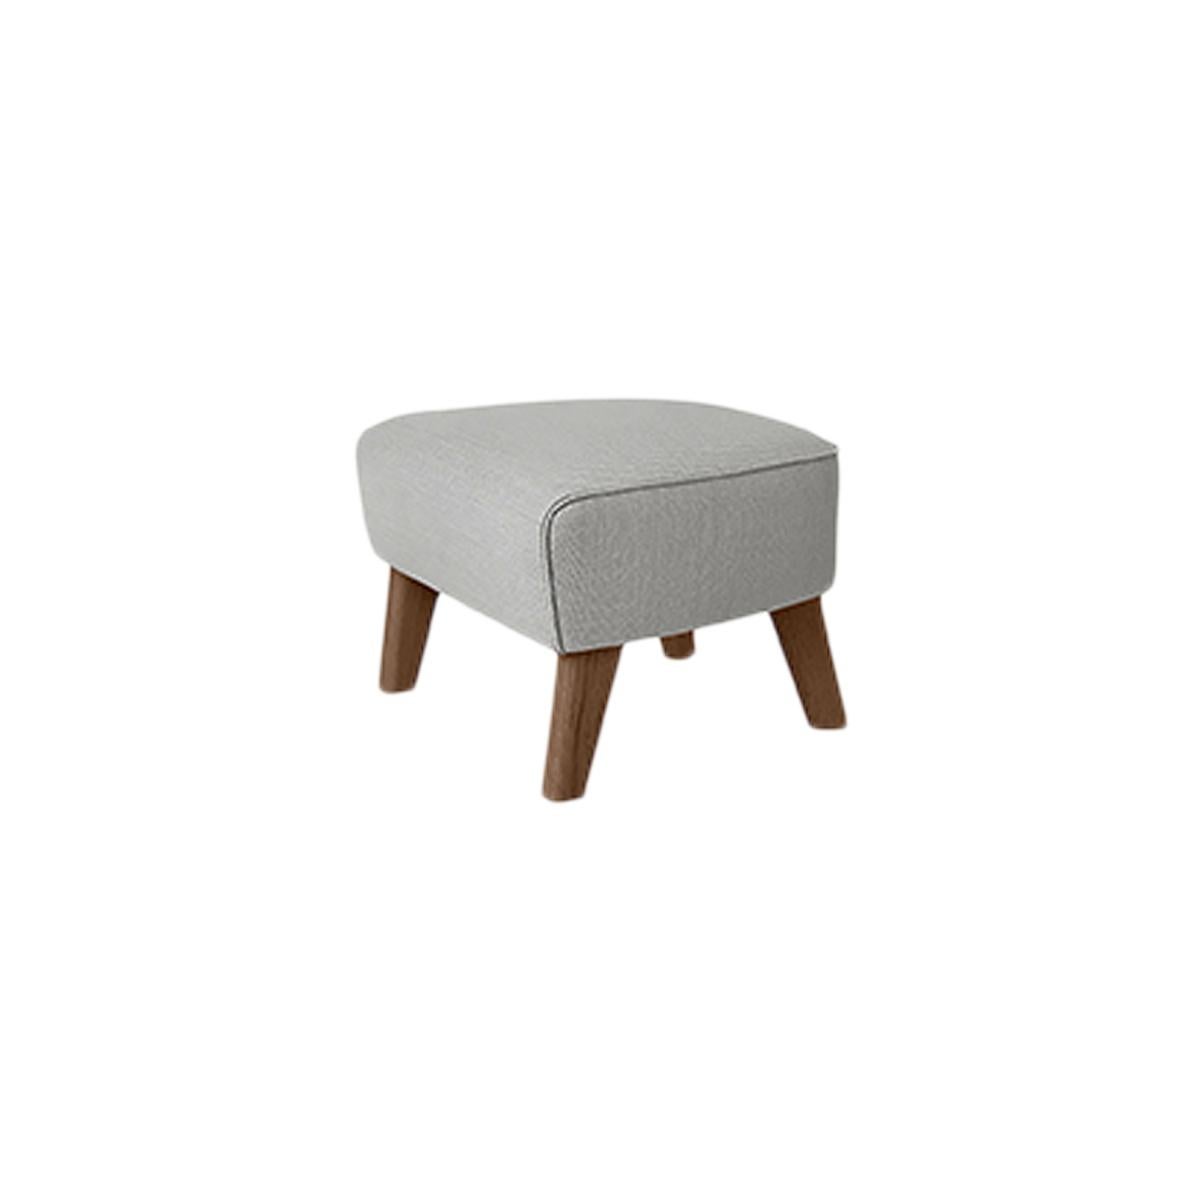 Light grey and smoked Oak Raf Simons Vidar 3 My Own chair footstool by Lassen
Dimensions: w 56 x d 58 x h 40 cm 
Materials: Textile
Also available: Other colors available.

The My Own Chair footstool has been designed in the same spirit as